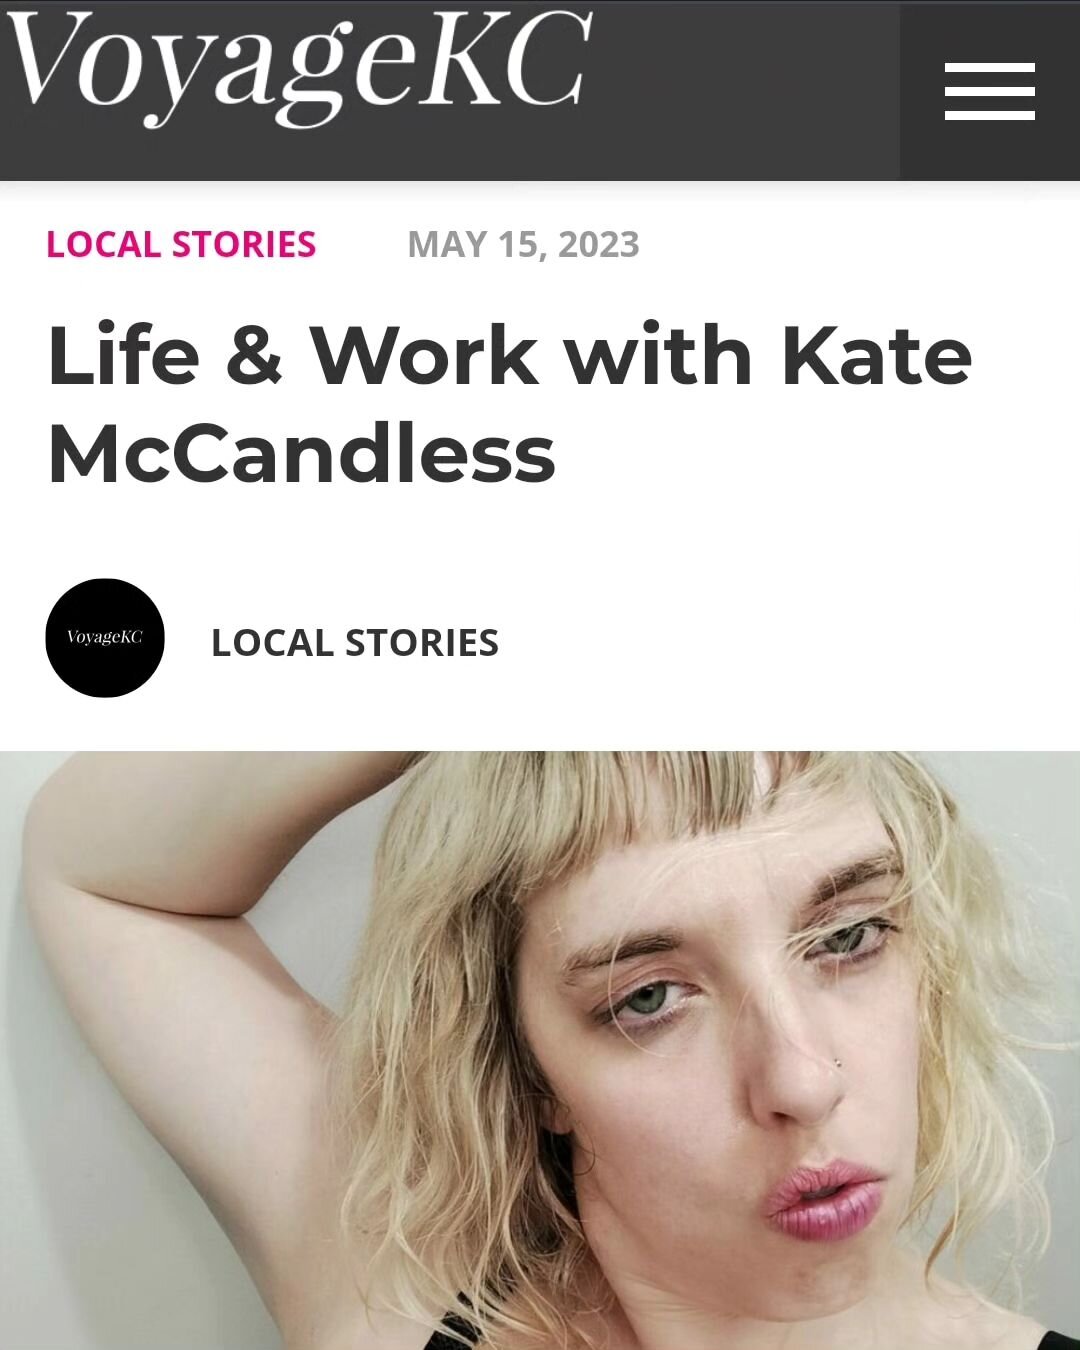 Oh heeeeeey @voyagekcmag 

Thank you 🙏🔥

Like in bio

or

https://voyagekc.com/interview/life-work-with-kate-mccandless-of-kansas-city-mo/

Catch me performing PJ HARVEY's TO BRING YOU MY LOVE this Summer at @lemonadeparkkc with THE CODY WYOMING DE